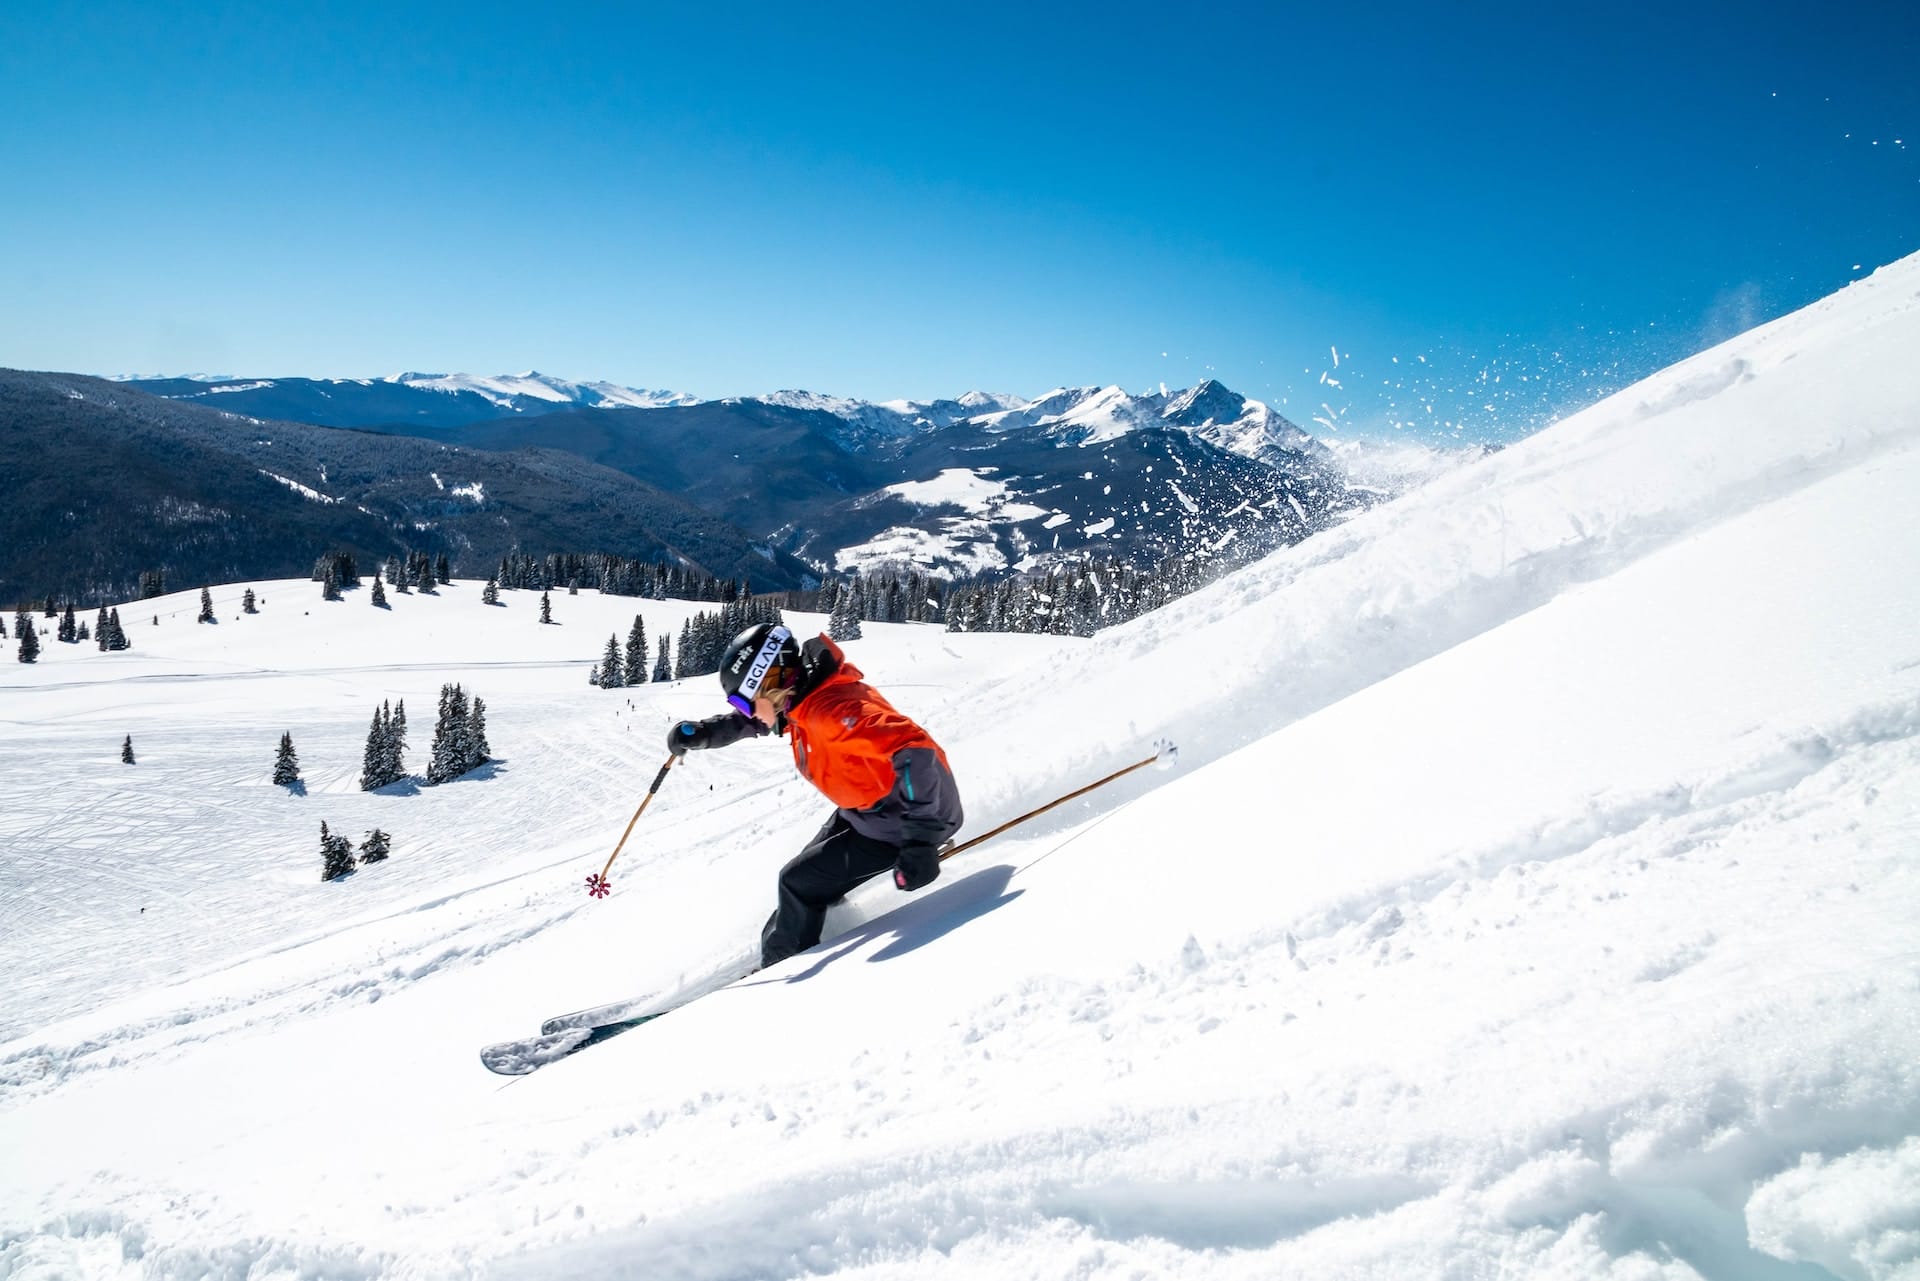 image of a skier skiing down a slope at Vail resort in Colorado